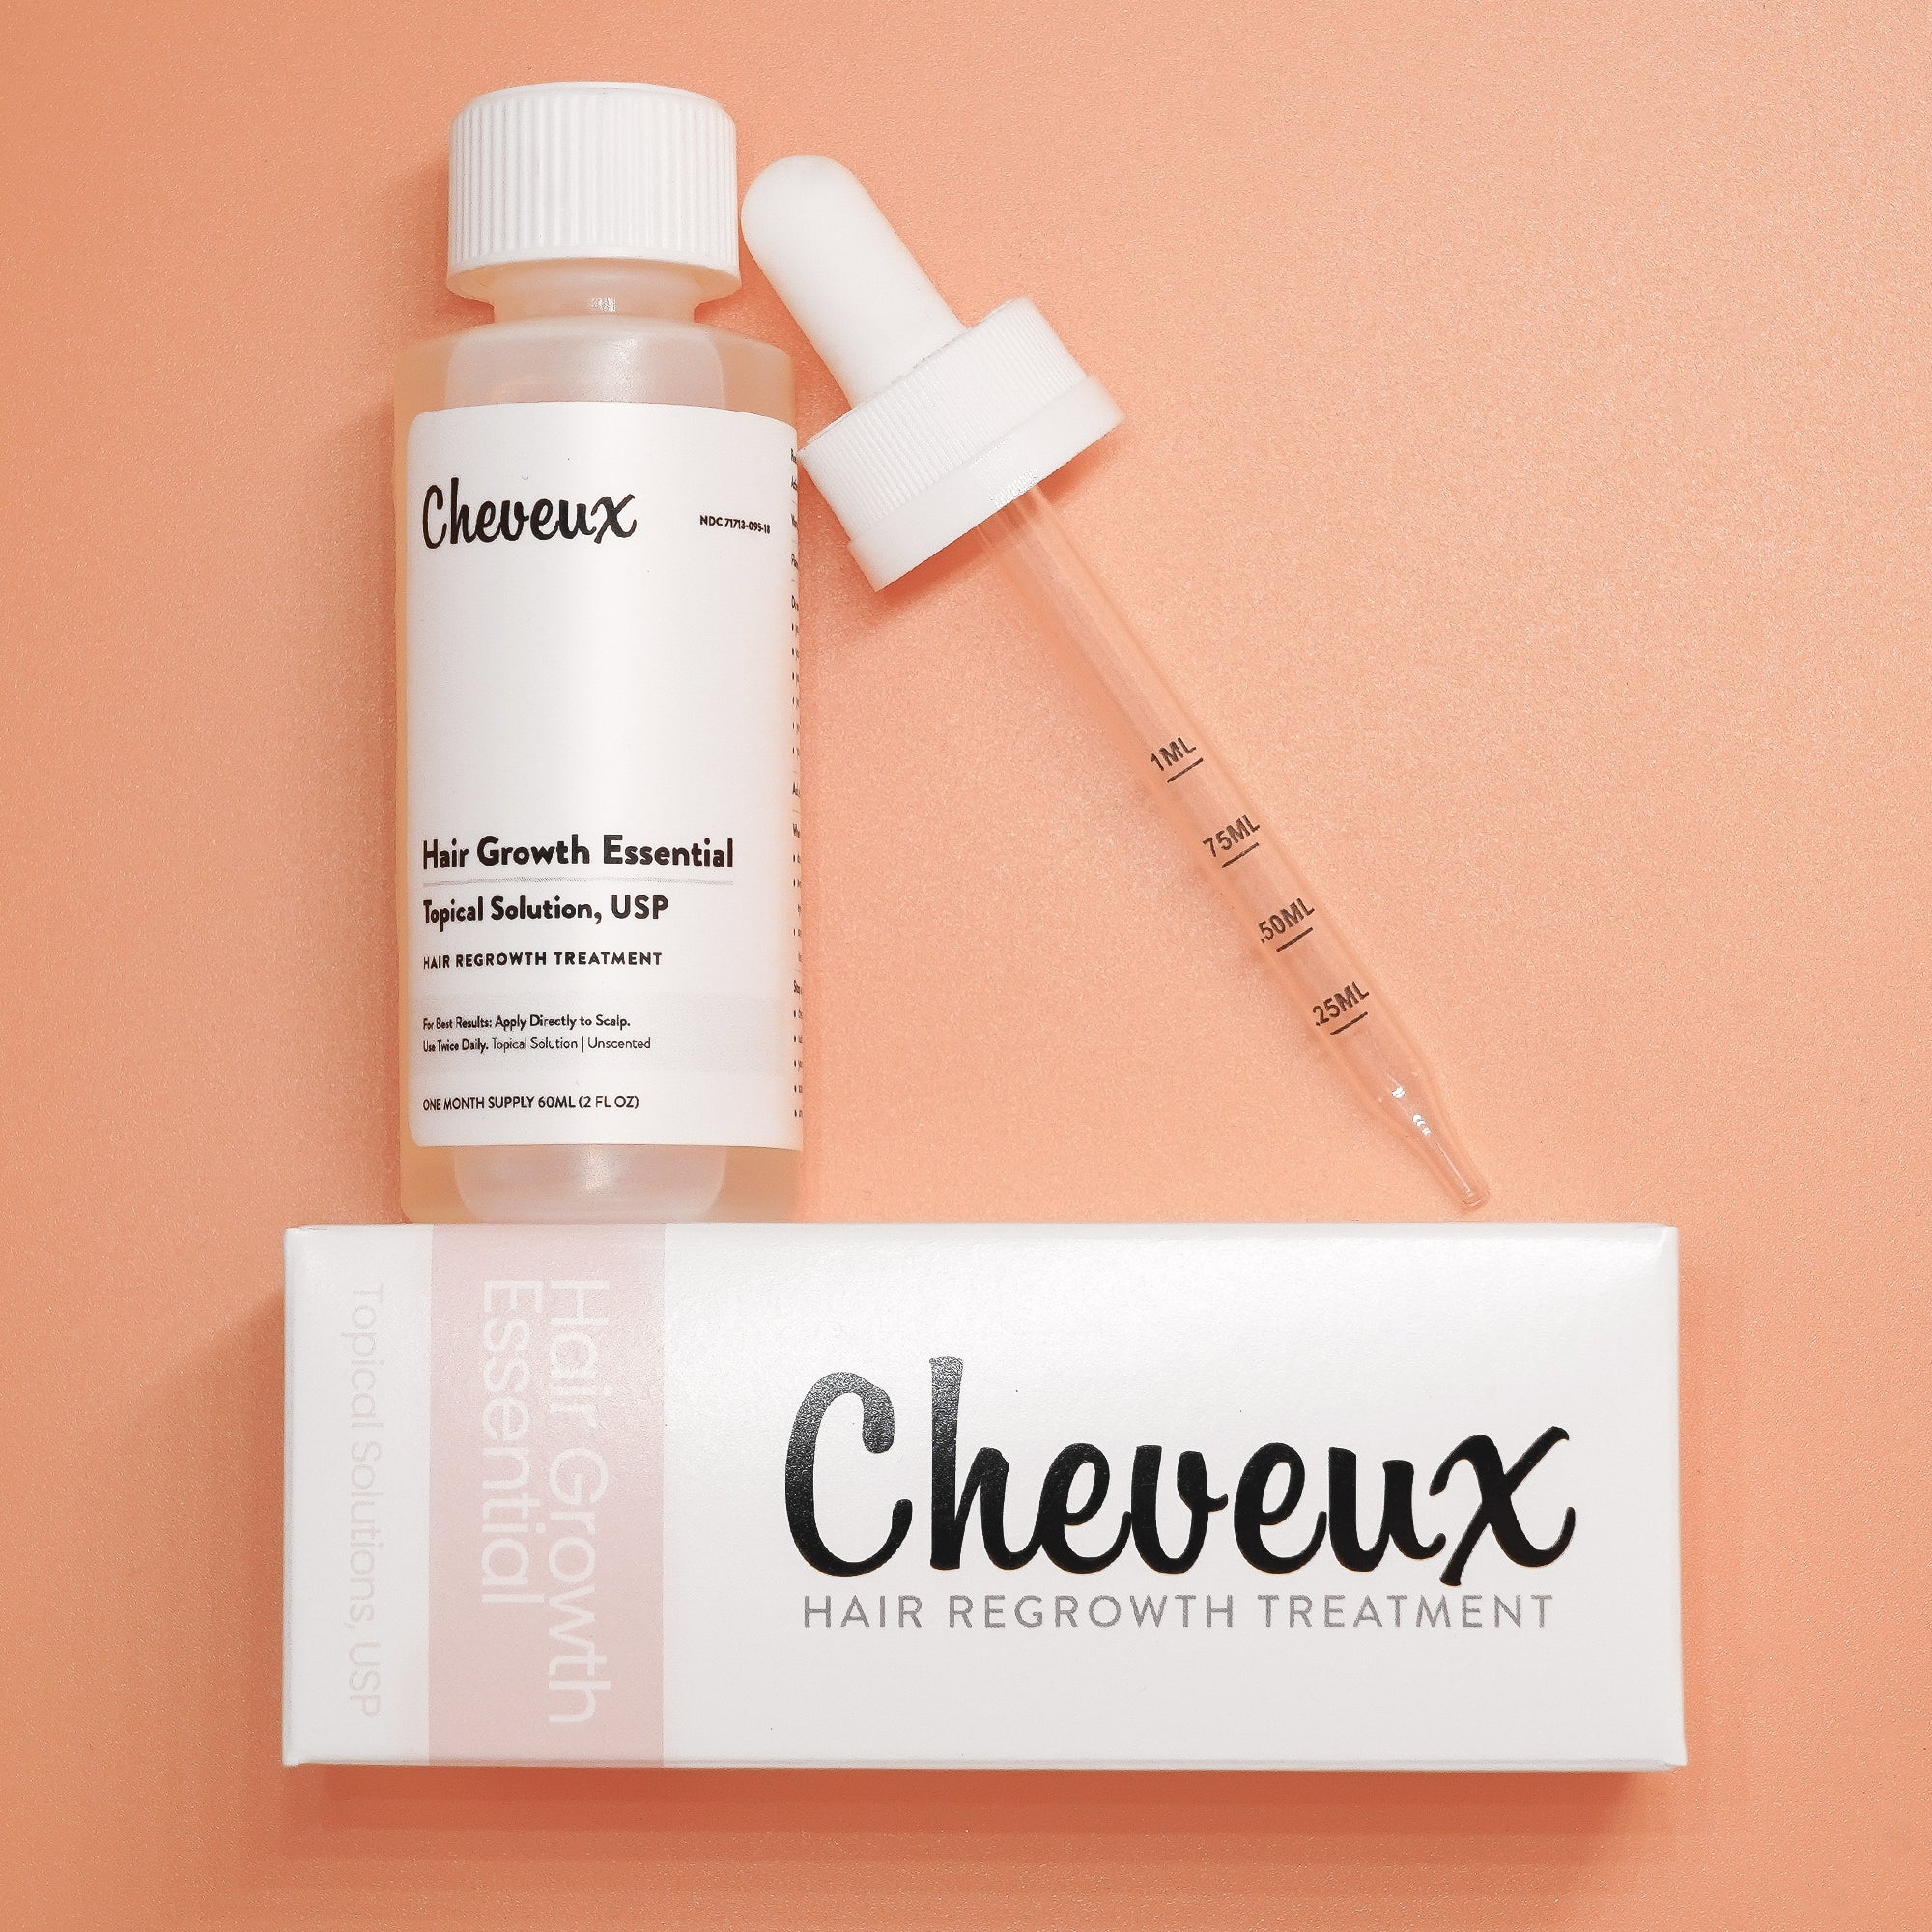 How-To: Get your Free Customized Prescription from CheveuxRx